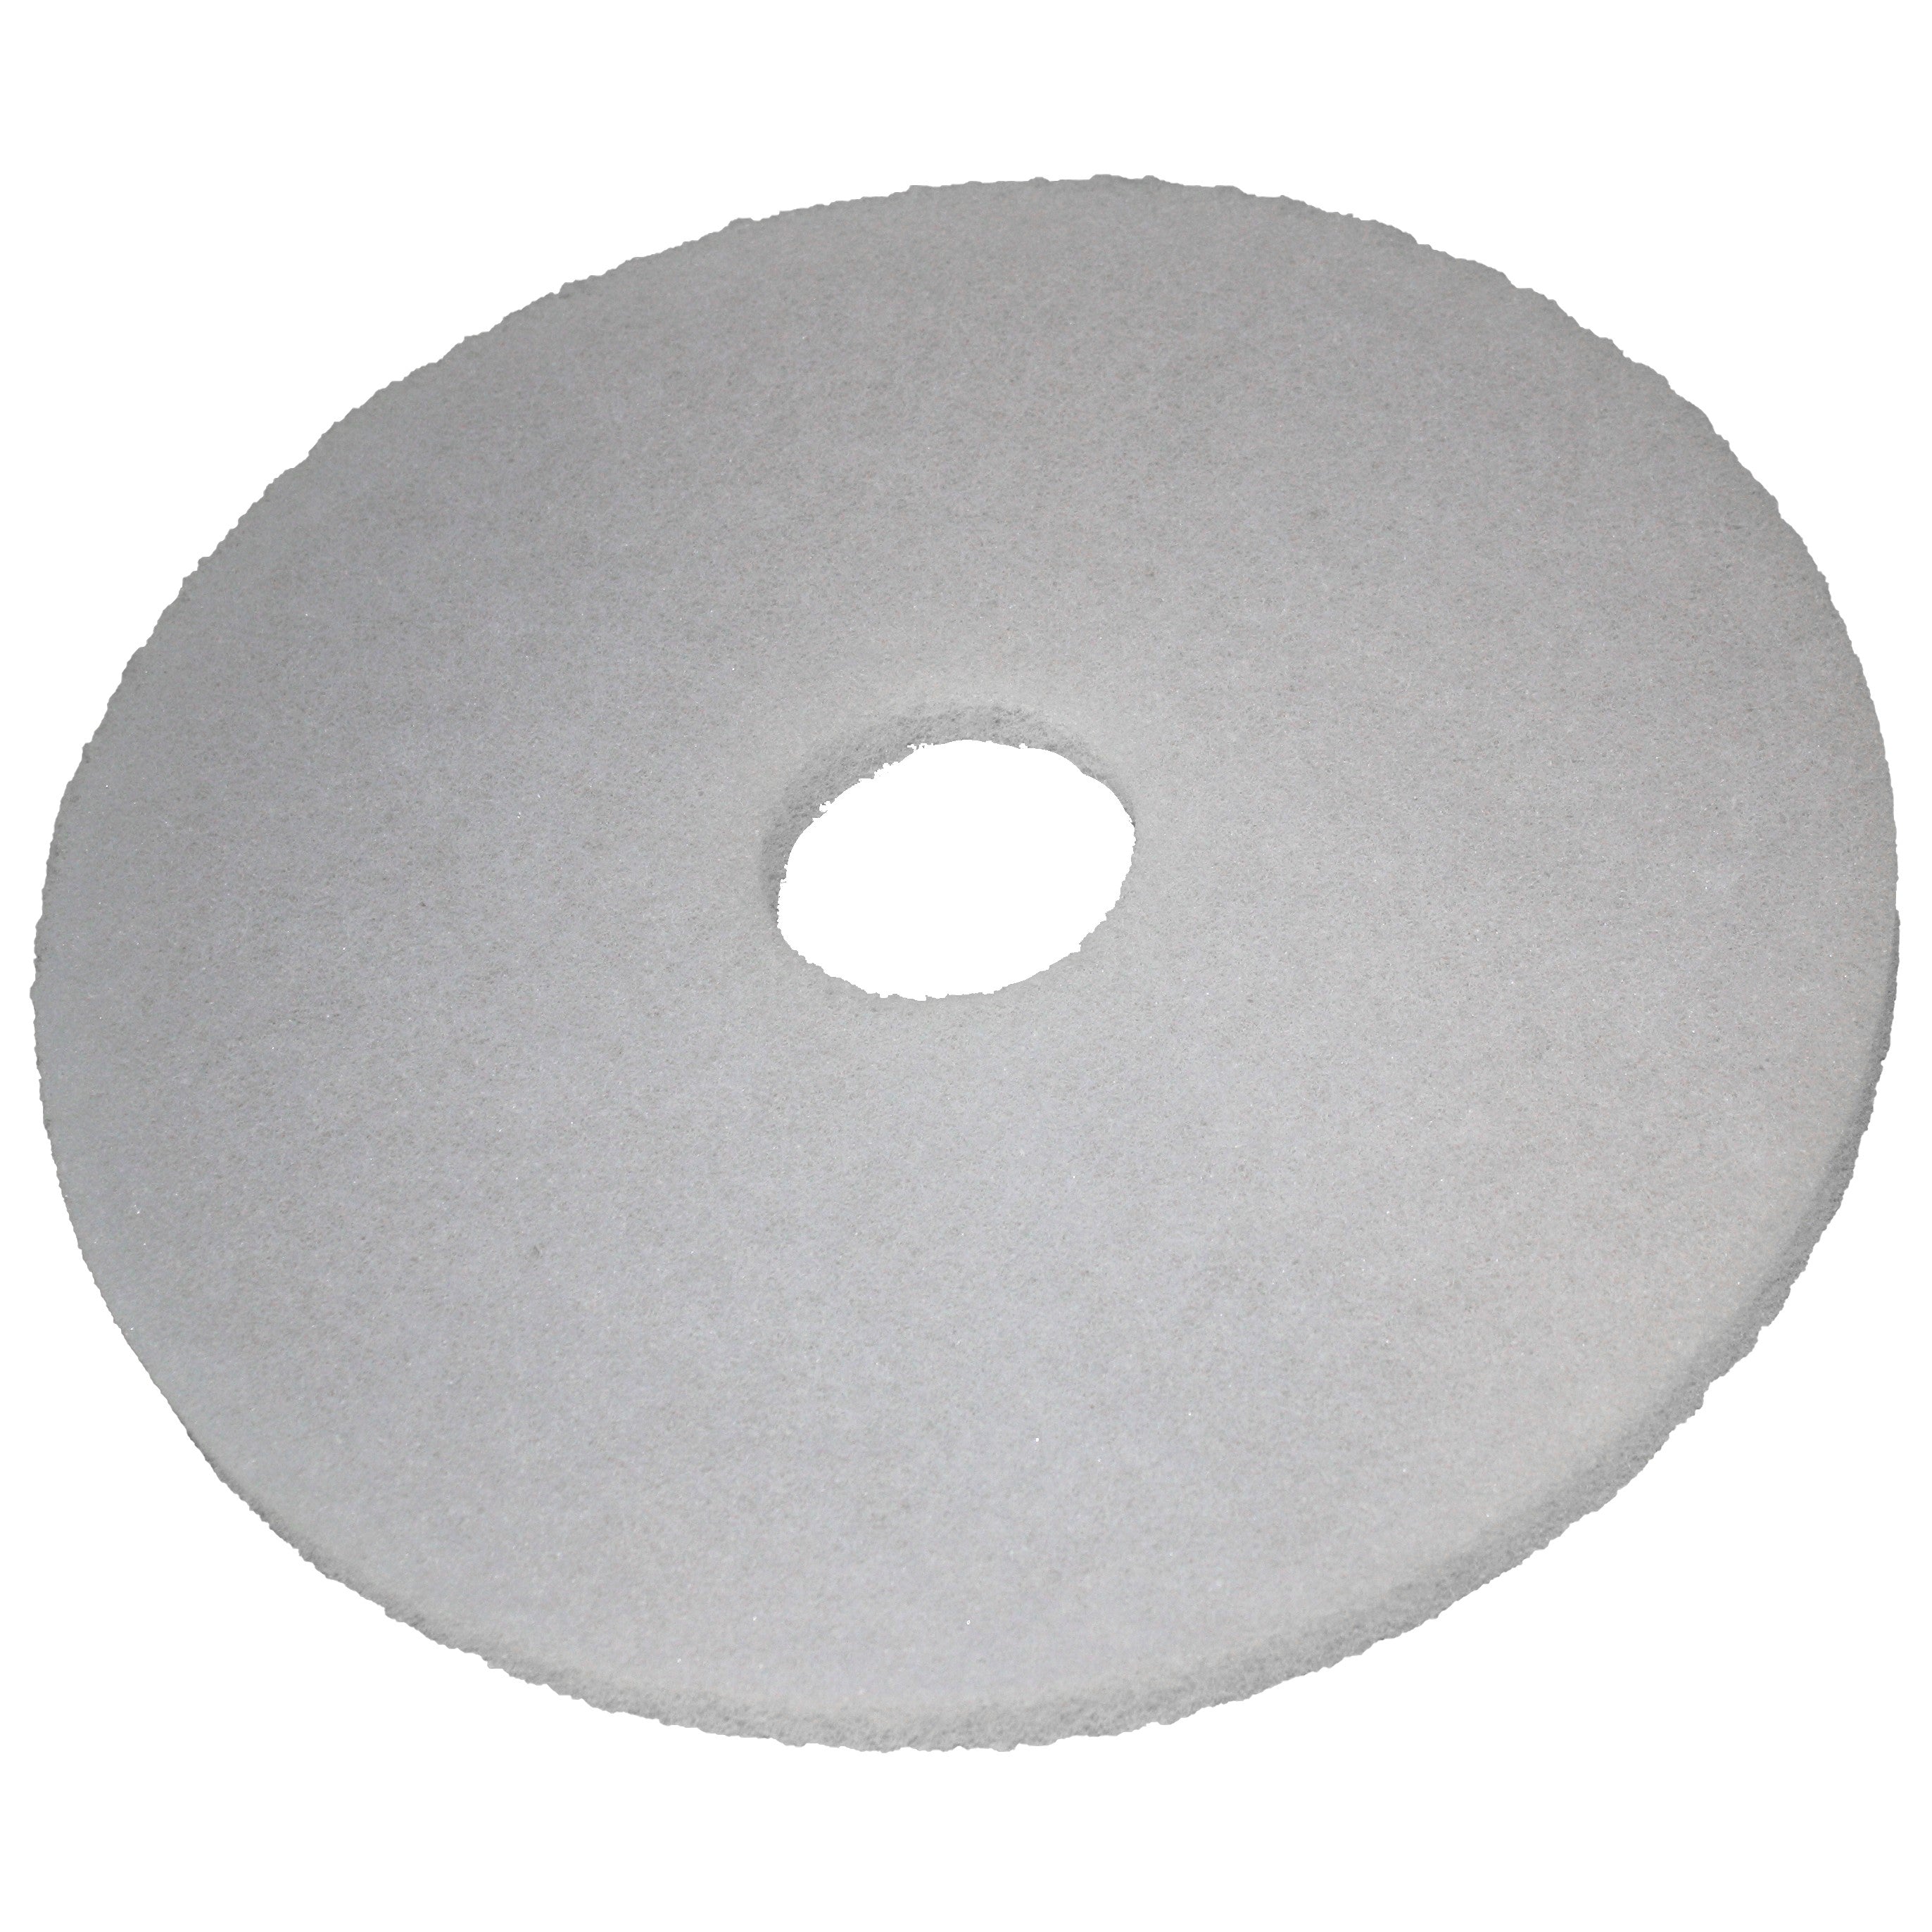 Pad weiss, Ø 381 mm, Polyester